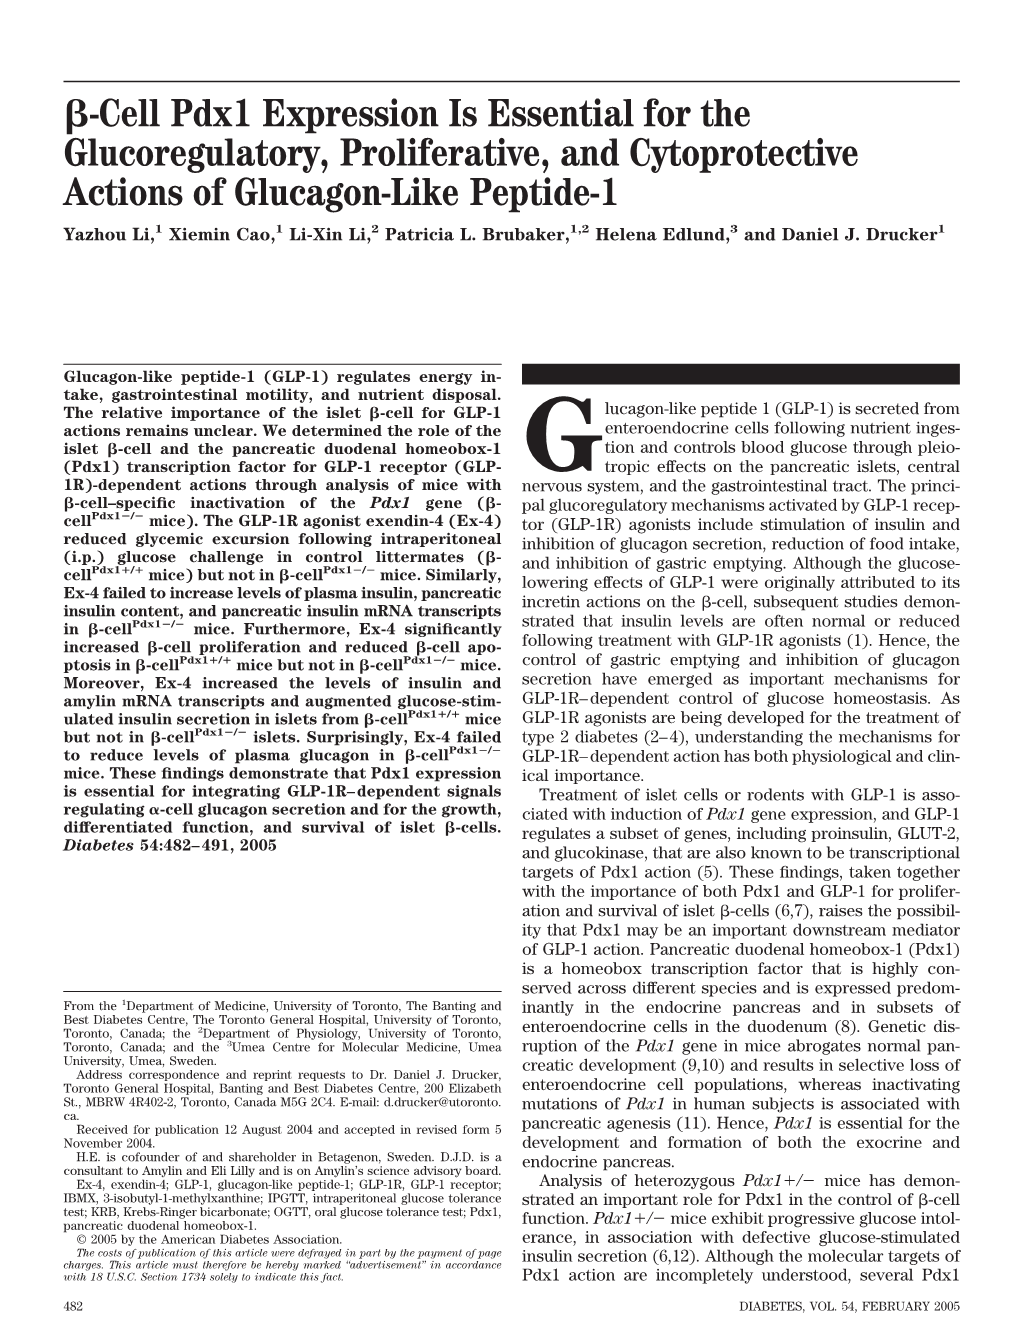 Cell Pdx1 Expression Is Essential for the Glucoregulatory, Proliferative, and Cytoprotective Actions of Glucagon-Like Peptide-1